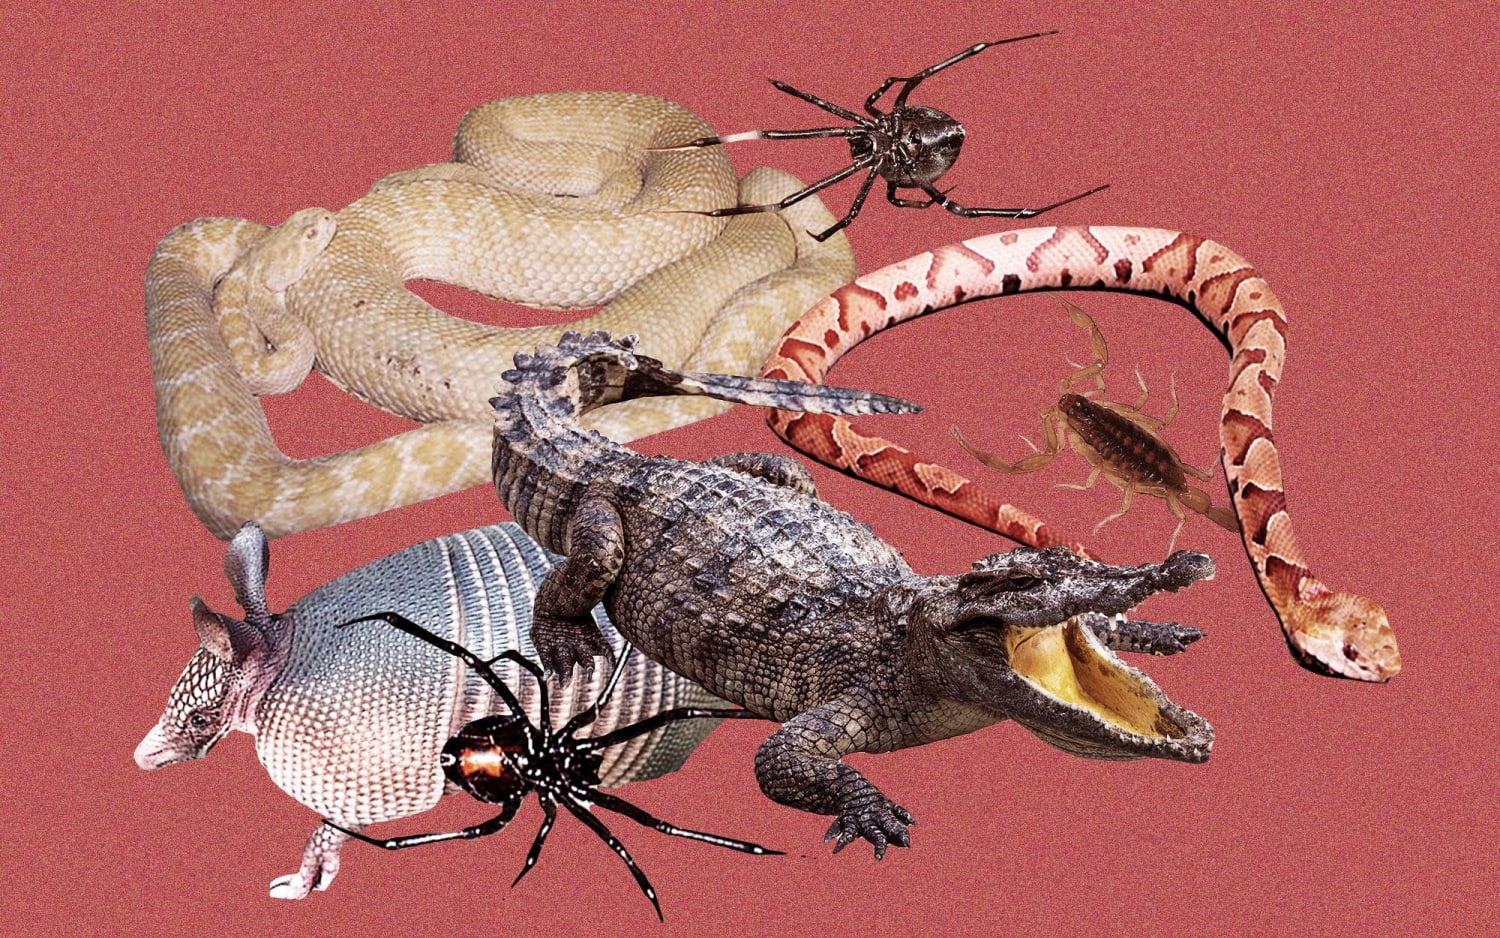 The 12 Most Dangerous Critters in Texas